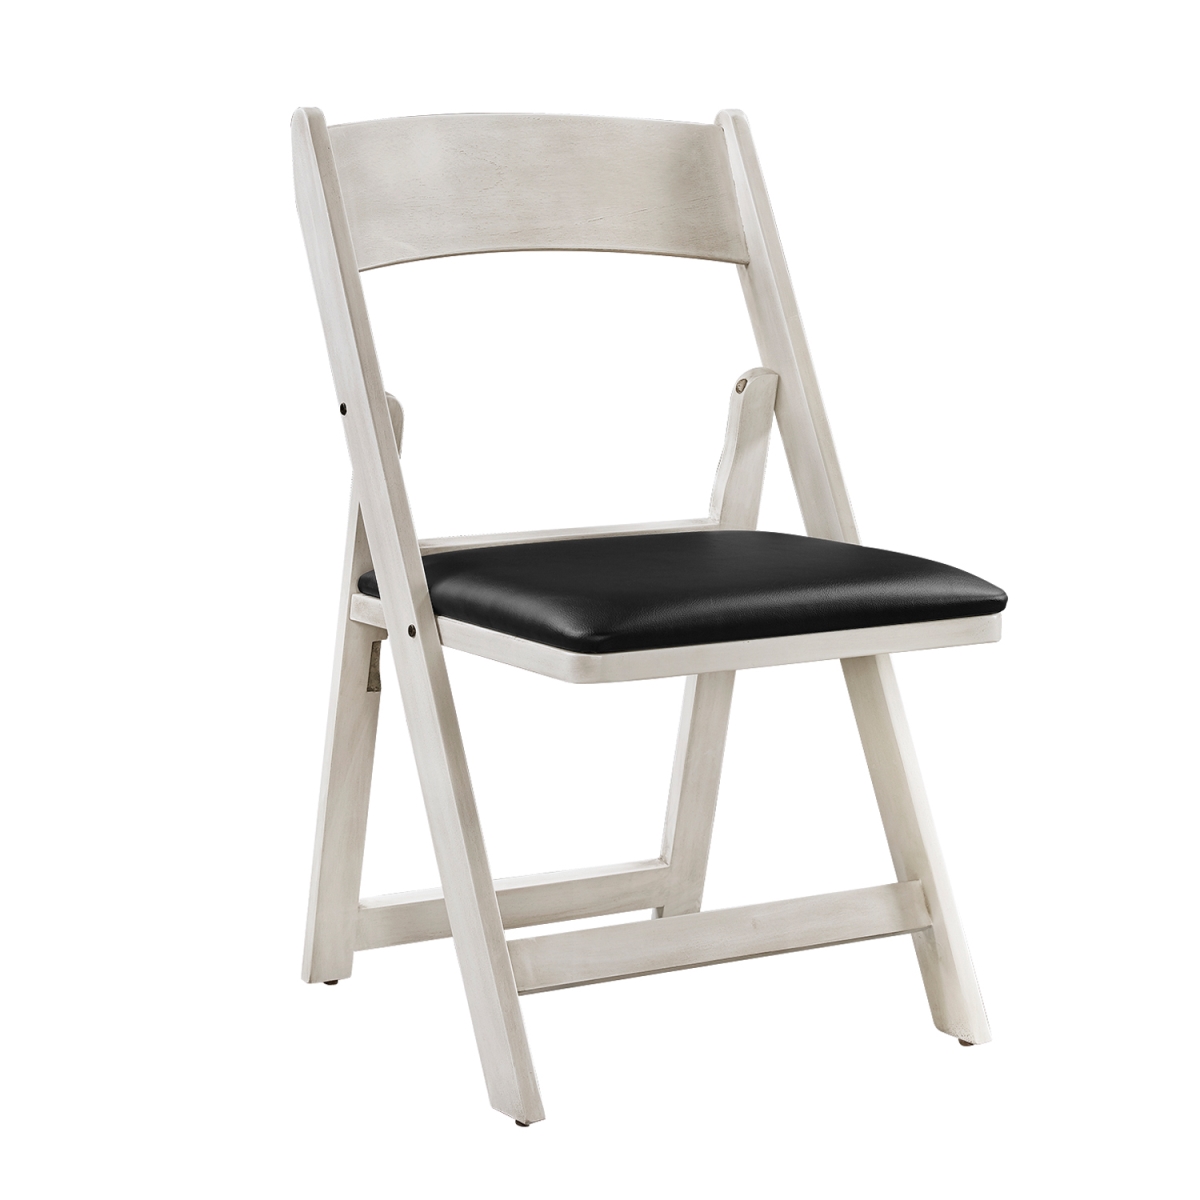 Picture of RAM Game Room GCHR4 AW 21 x 19 x 33 in. Folding Game Chair, Antique White